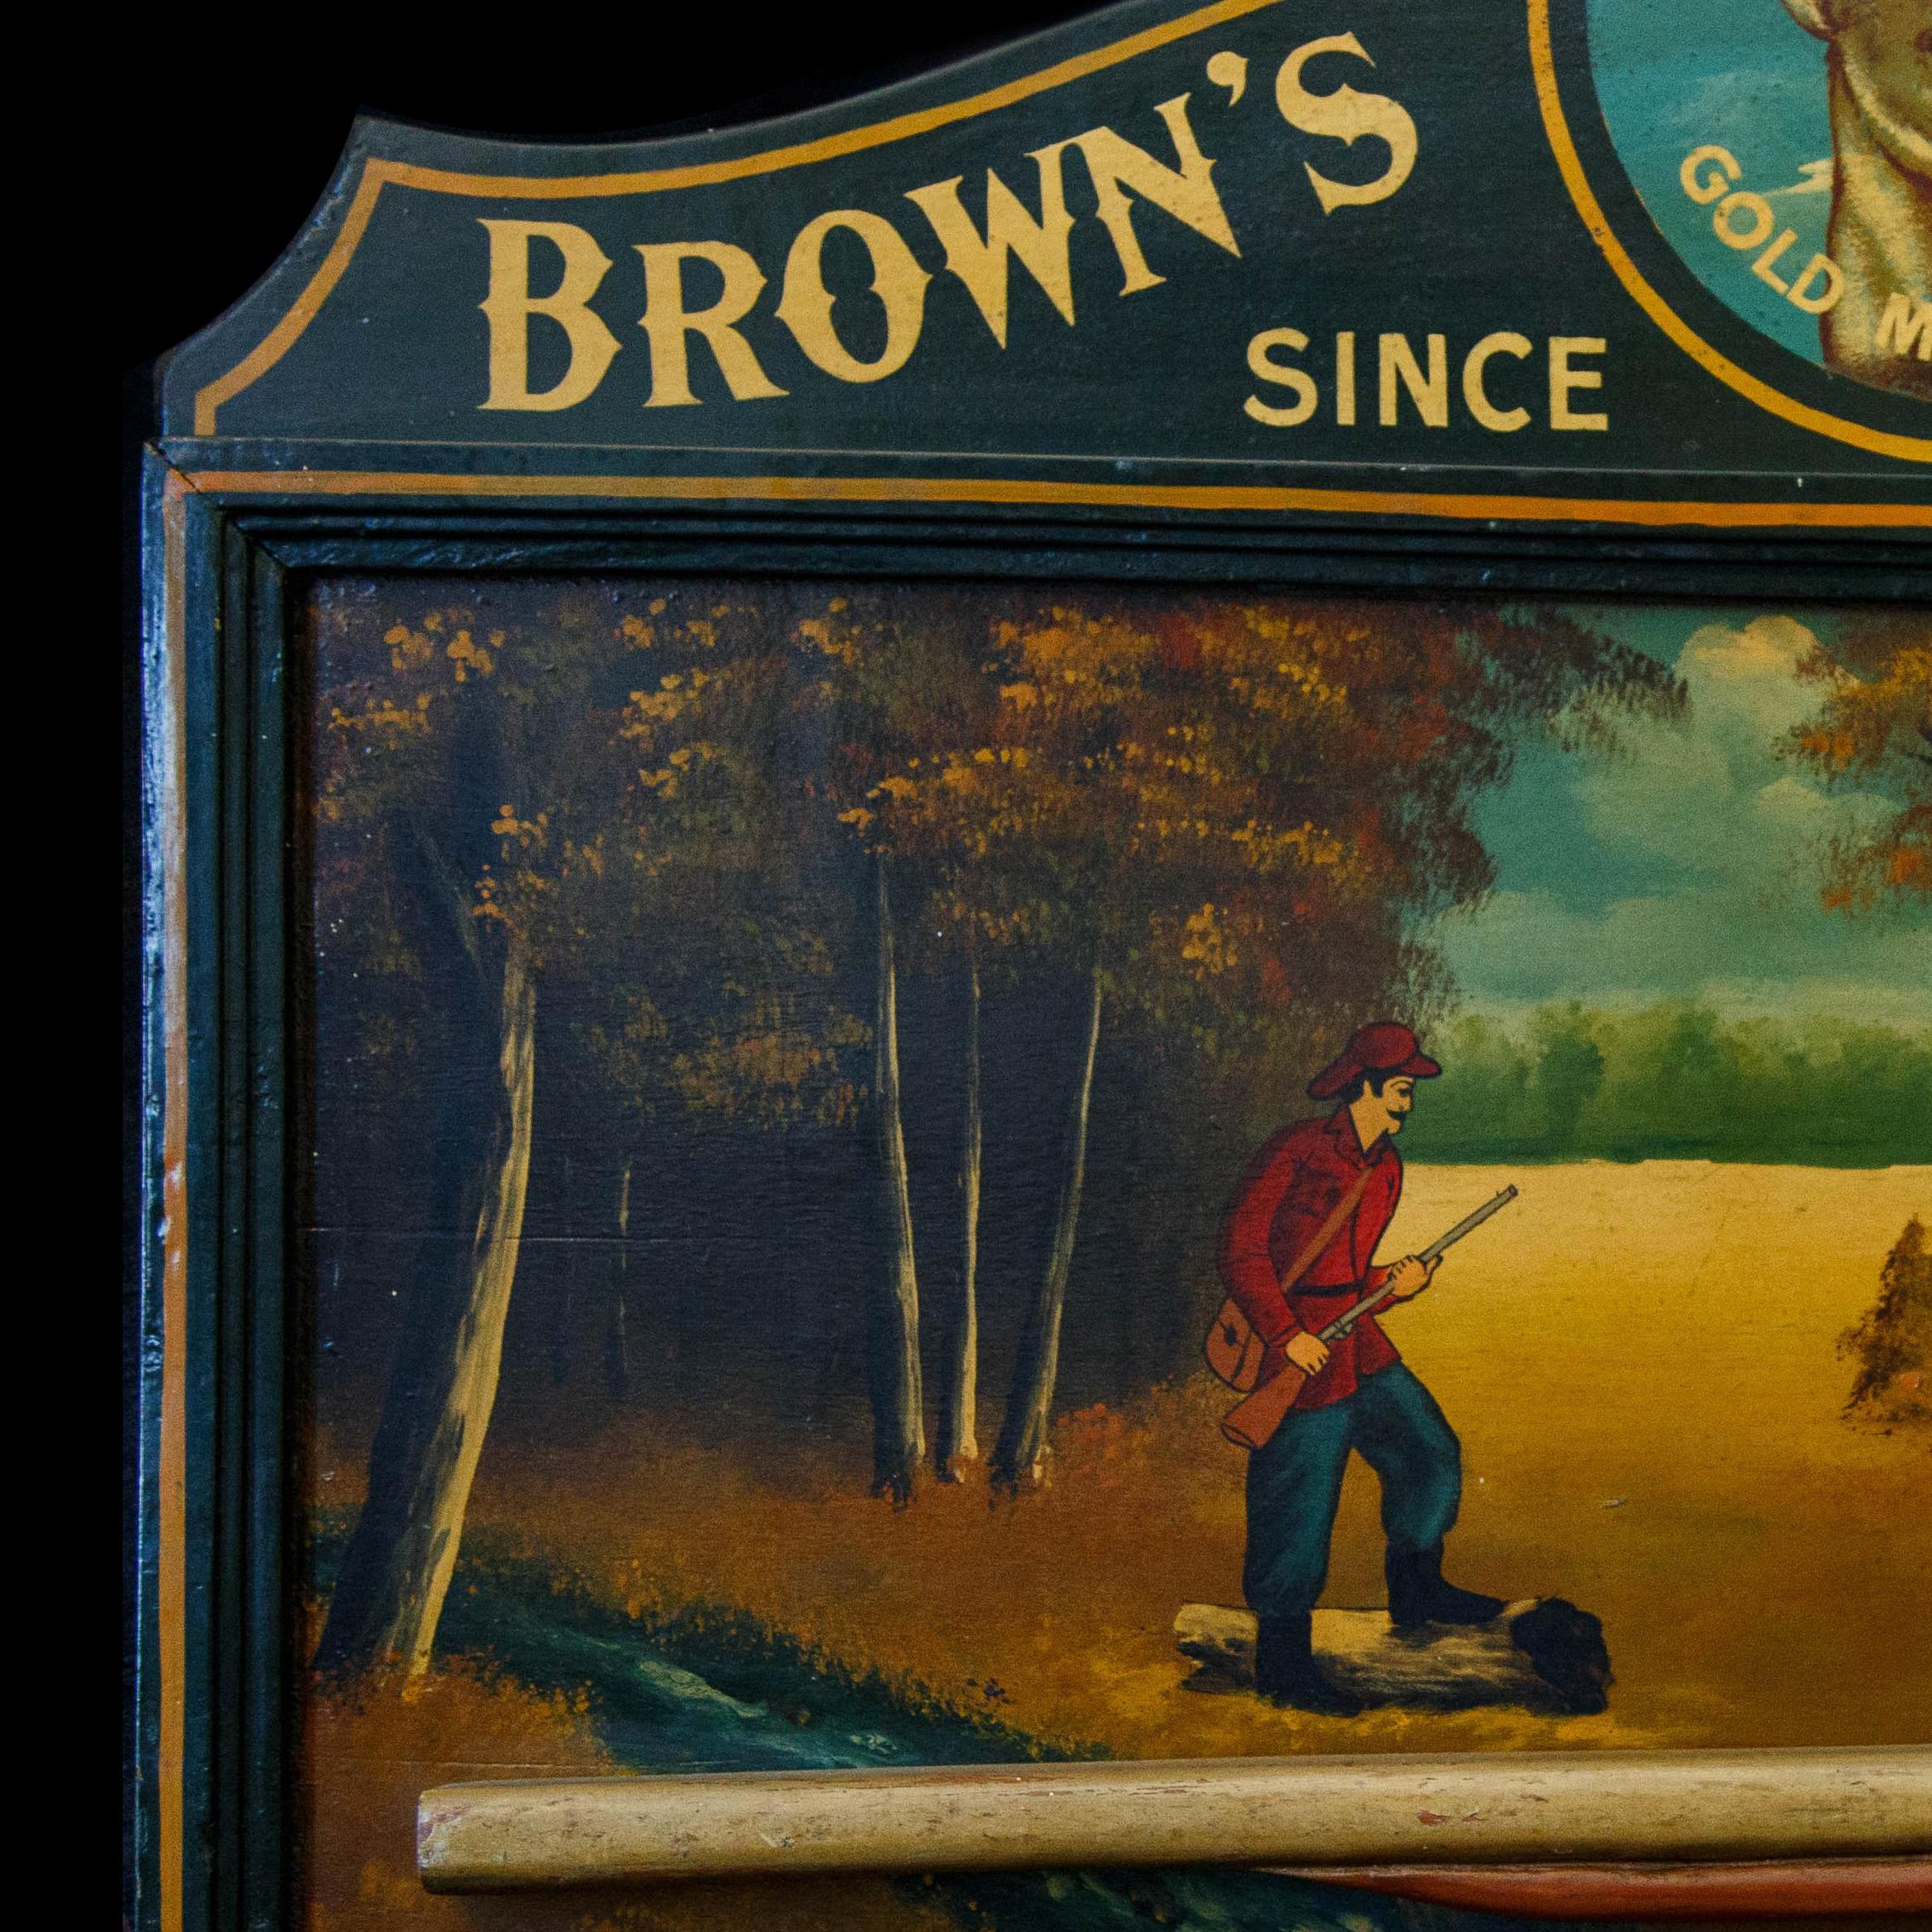 A Brown’s Finest Sporting sign
Painted wood, with a modelled gun
28 ½  x 38 in. (72.4 x 96.5 cm.)

Minor scuffs and surface dirt.
